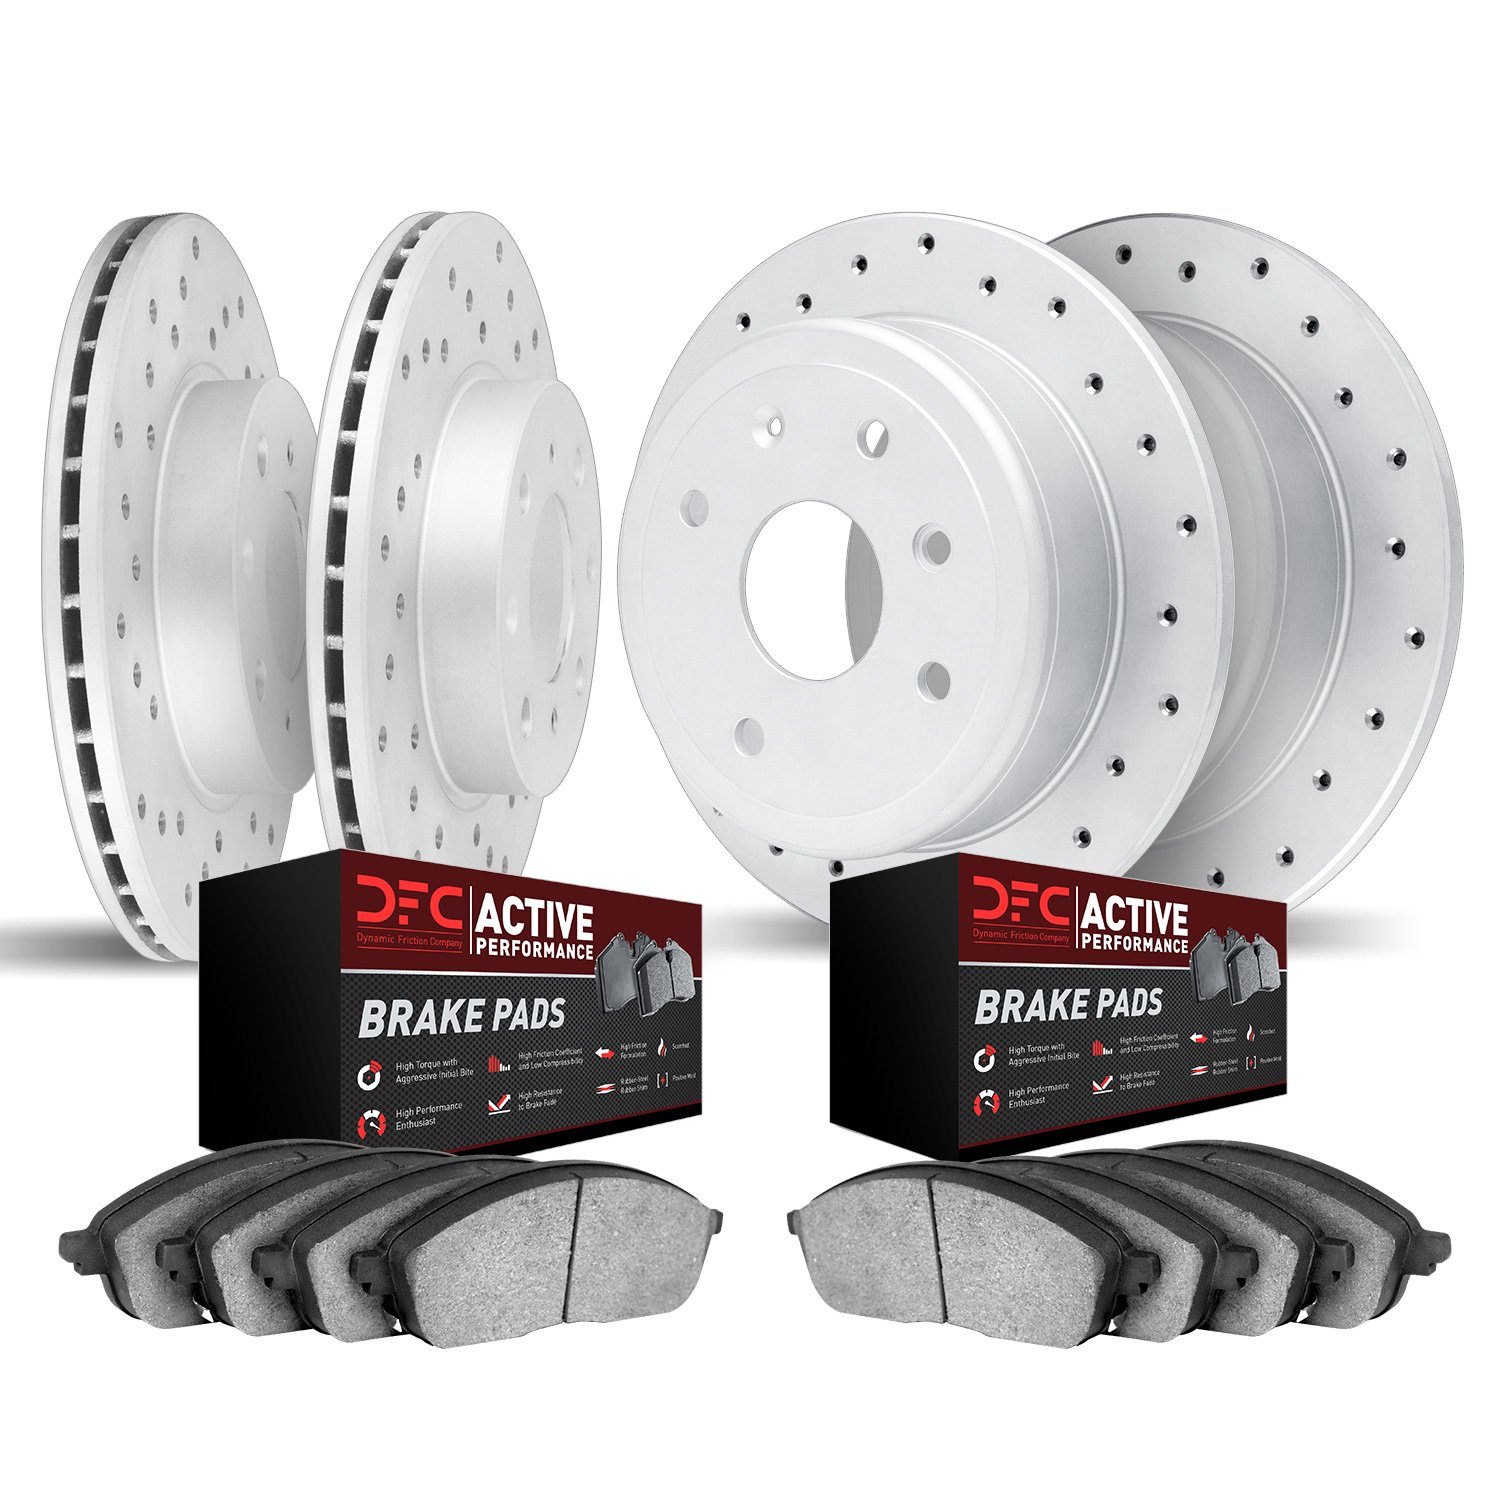 2704-80024 Geoperformance Drilled Brake Rotors with Active Performance Pads Kit, Fits Select Multiple Makes/Models, Position: Fr